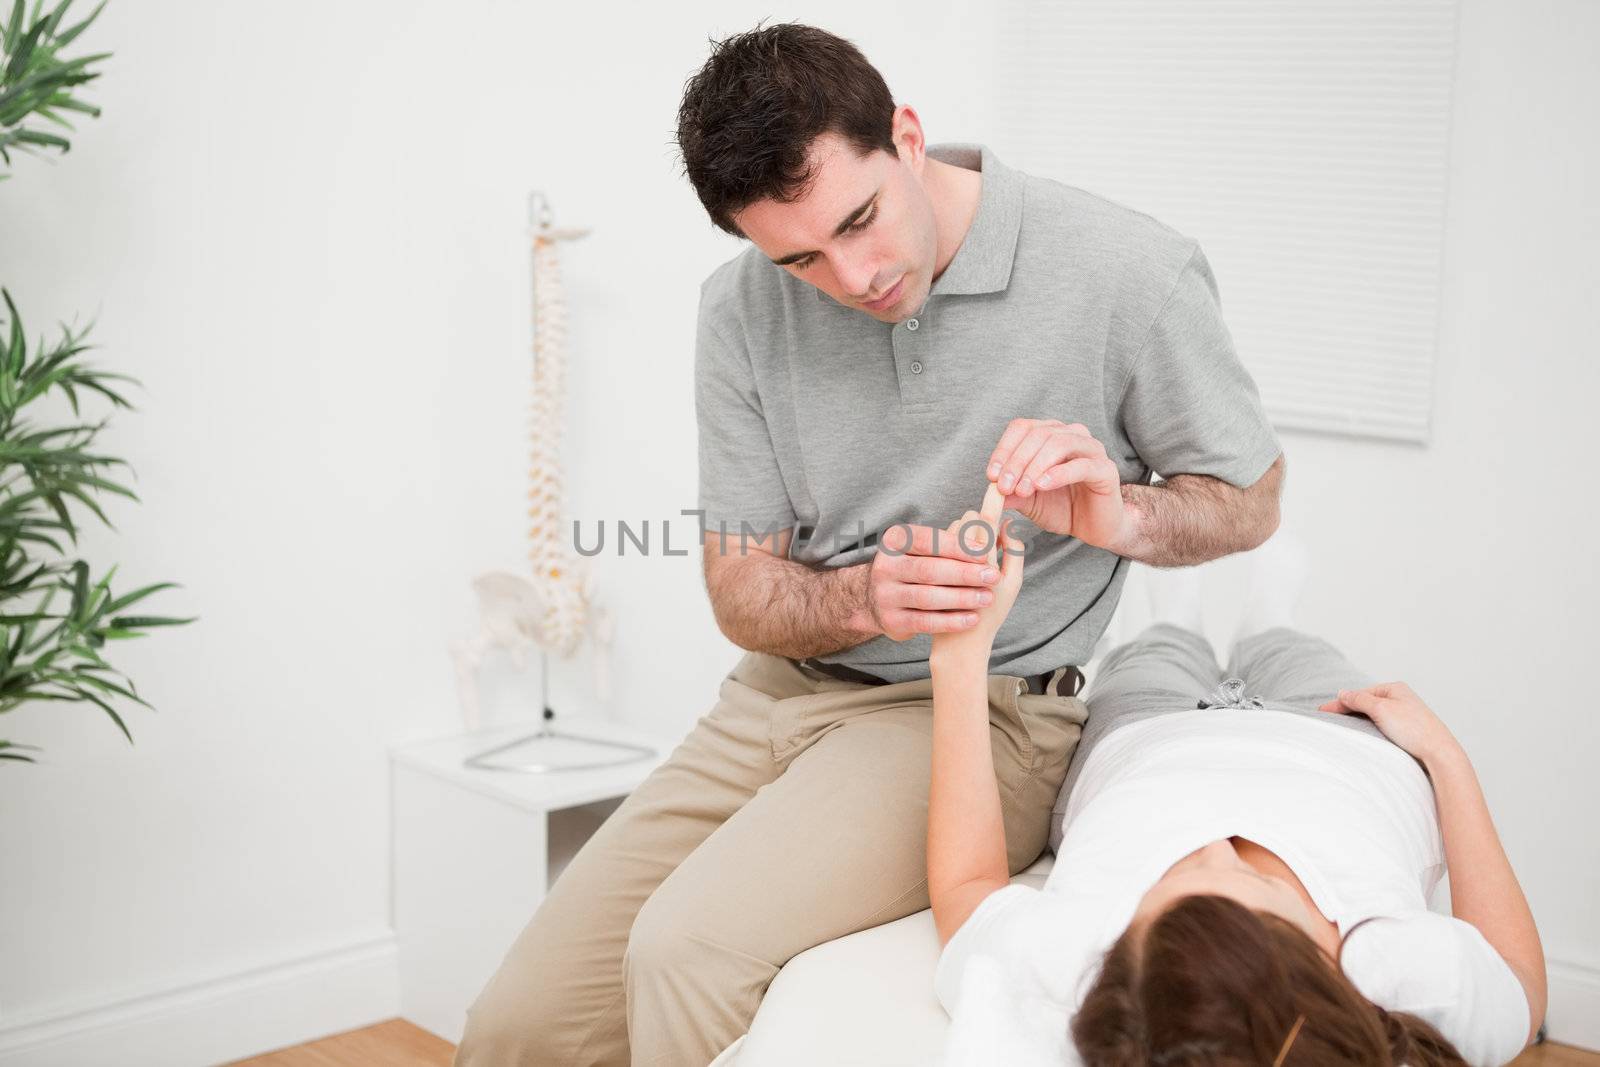 Physiotherapist moving the forefinger of a patient in a room